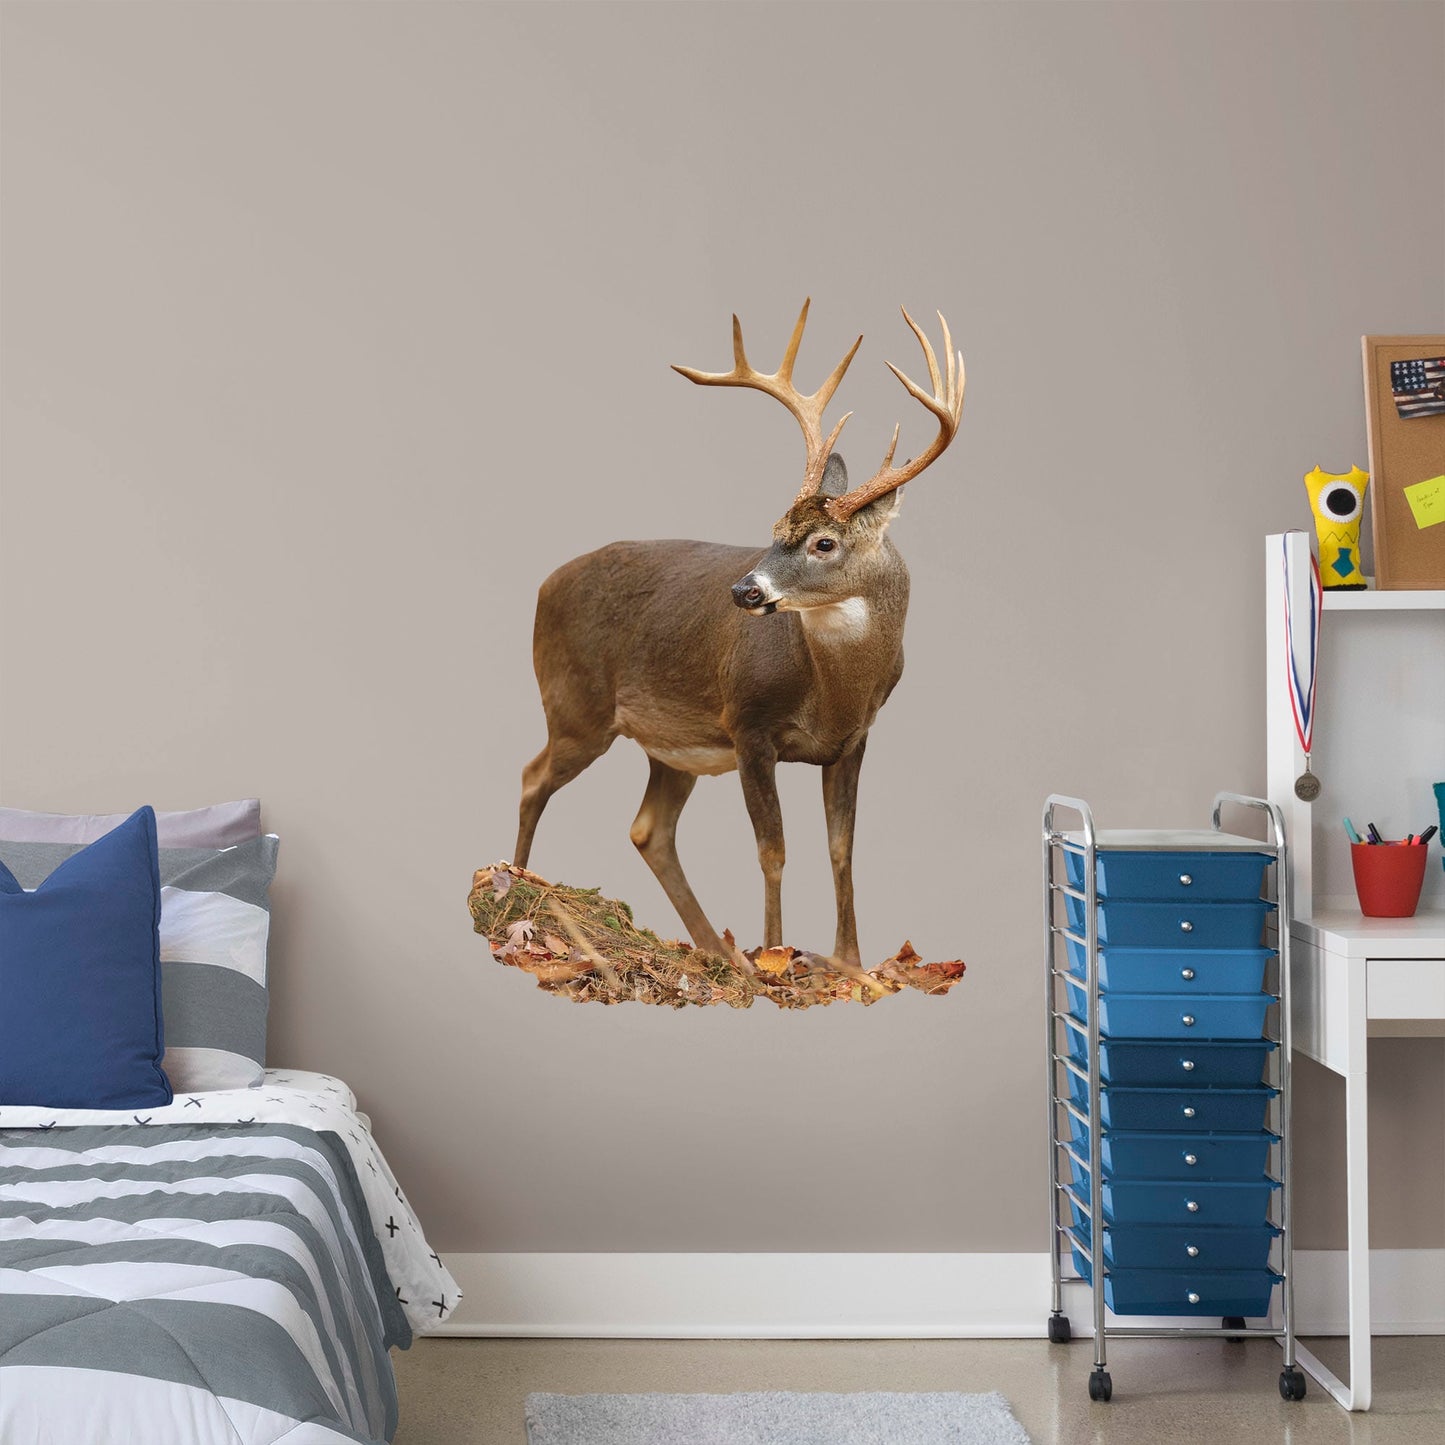 Giant Animal + 2 Decals (36"W x 51"H)